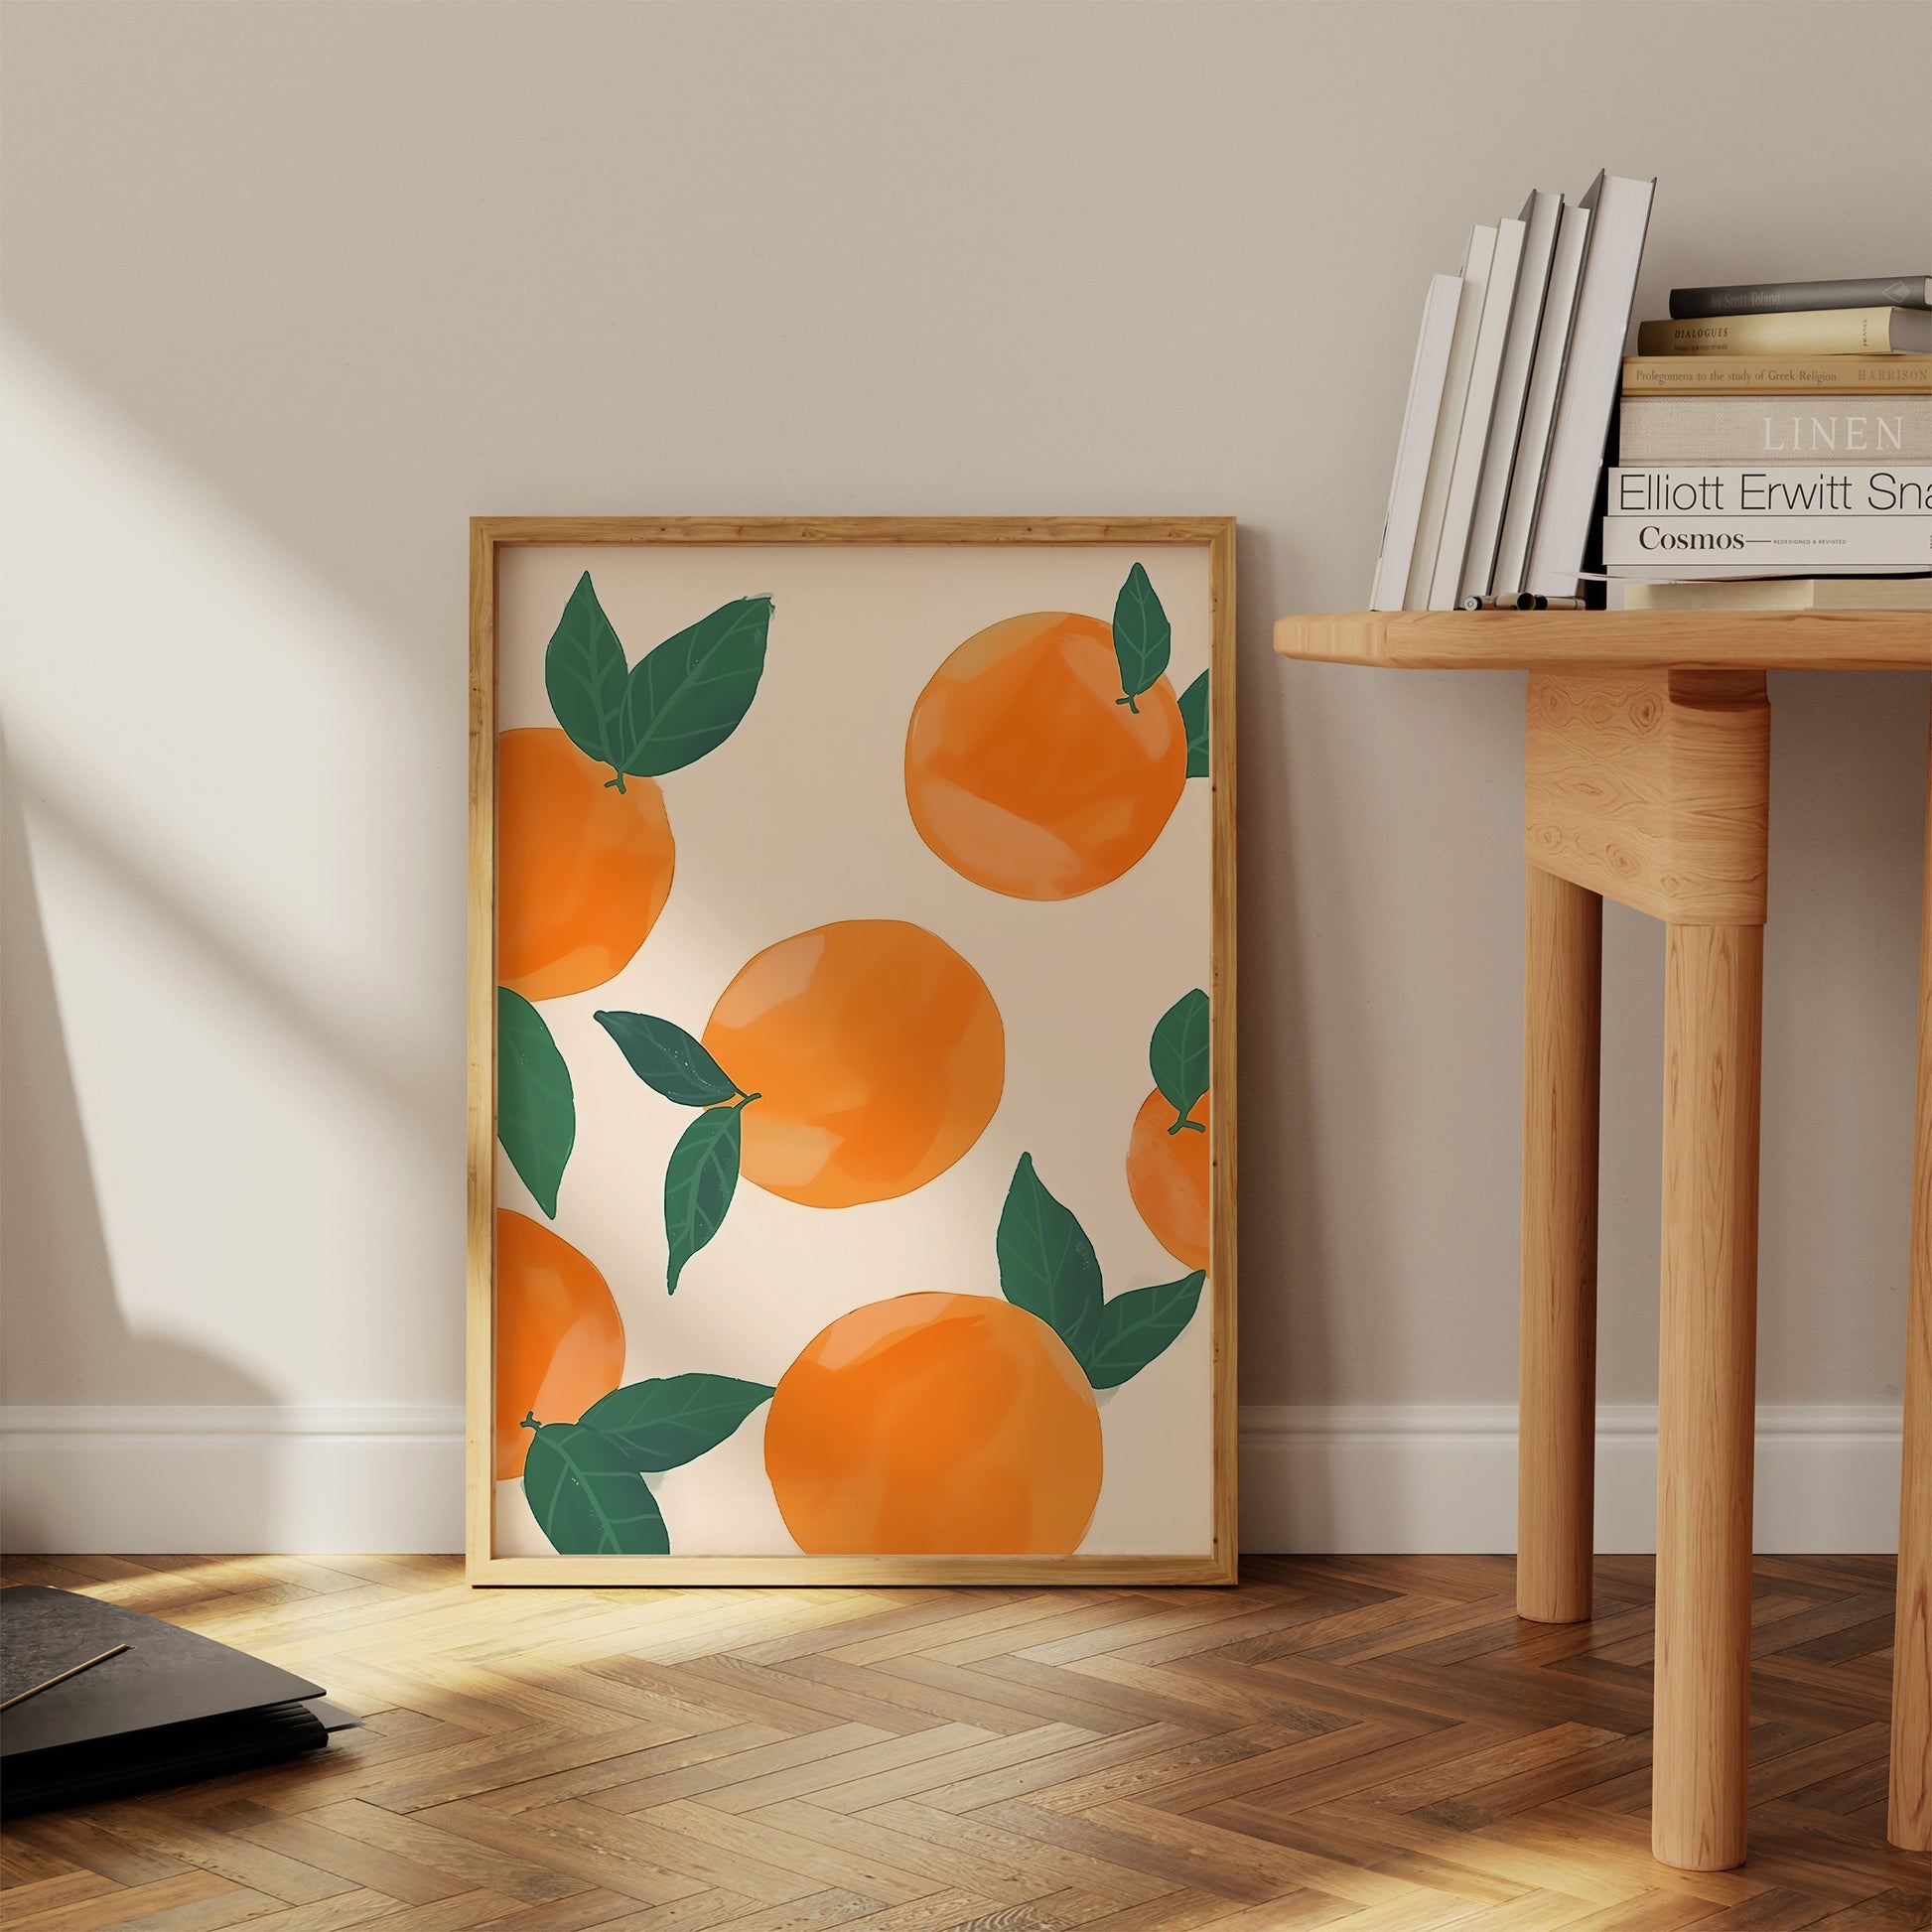 A framed artwork of oranges with leaves leaning against a wall beside a wooden table.